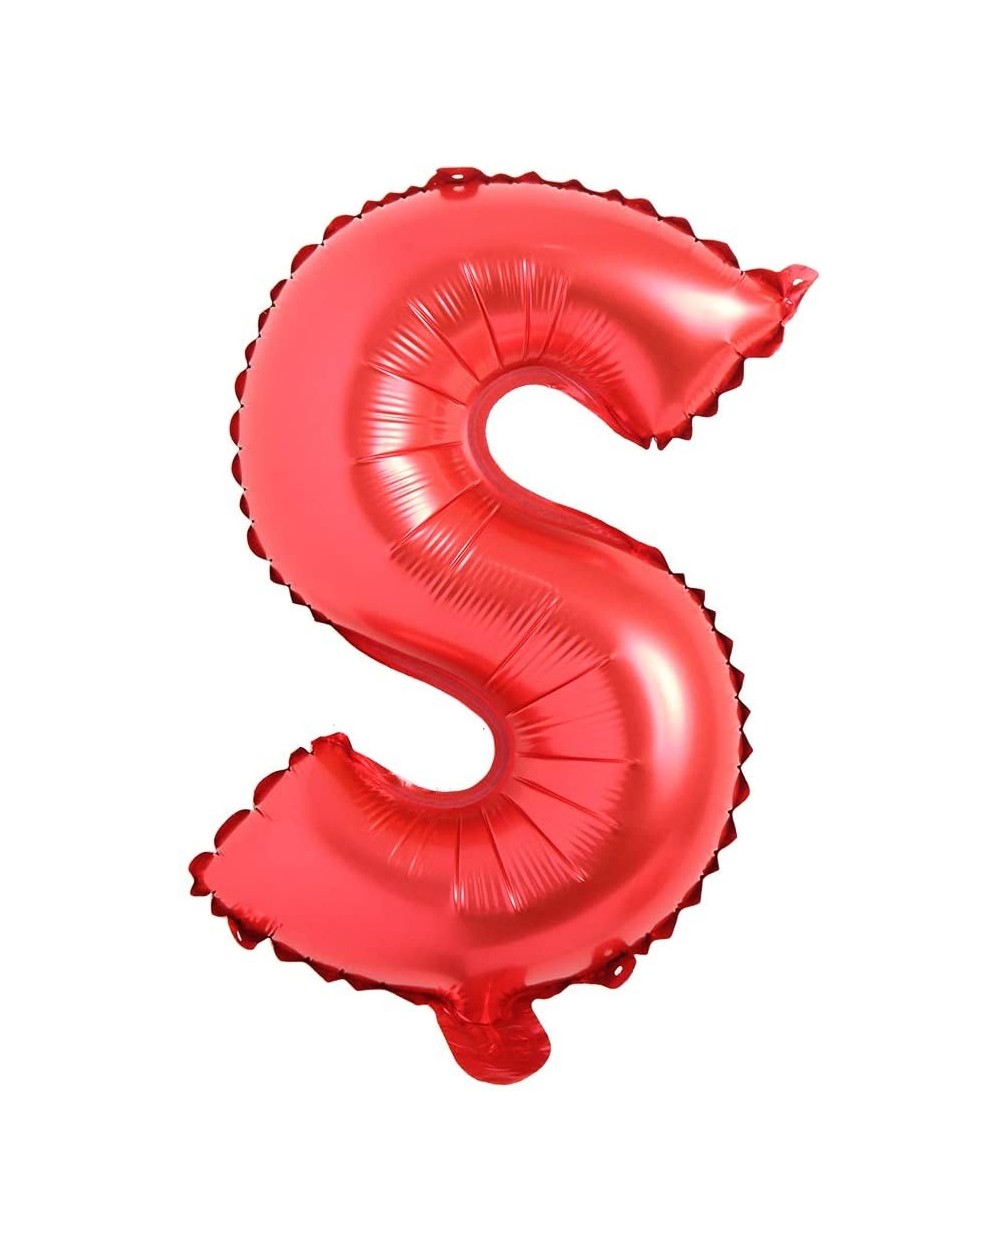 Balloons 16" inch Single Red Alphabet Letter Number Balloons Aluminum Hanging Foil Film Balloon Wedding Birthday Party Decora...